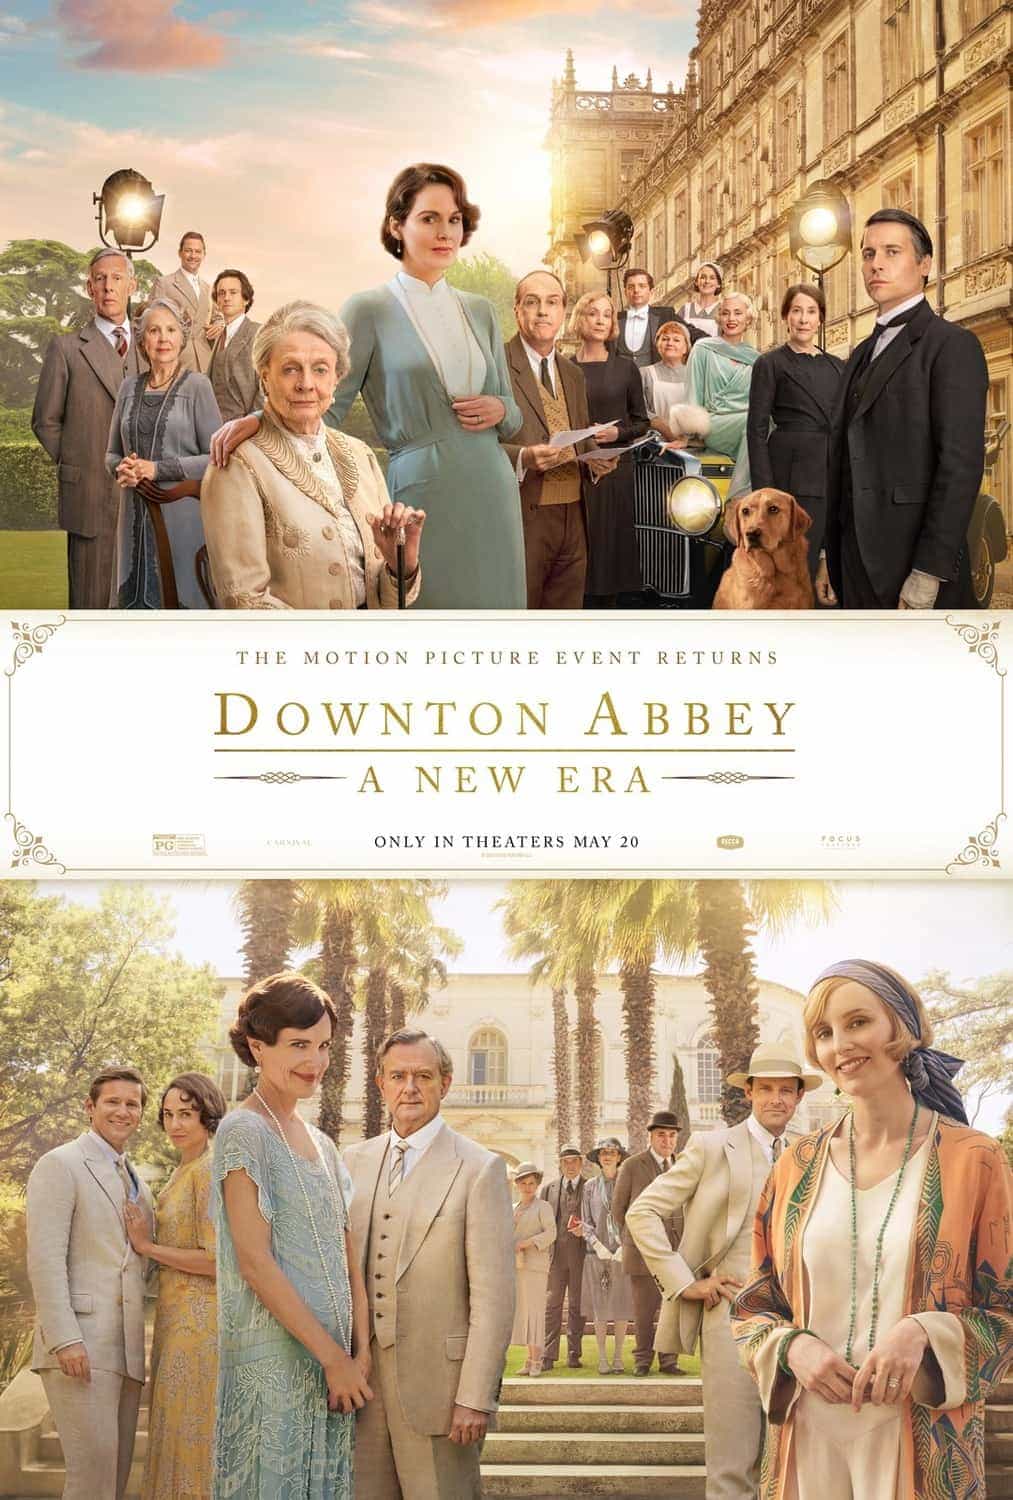 New poster released for Downton Abbey: A New Era starring Dominic West - movie release date 18th March 2022